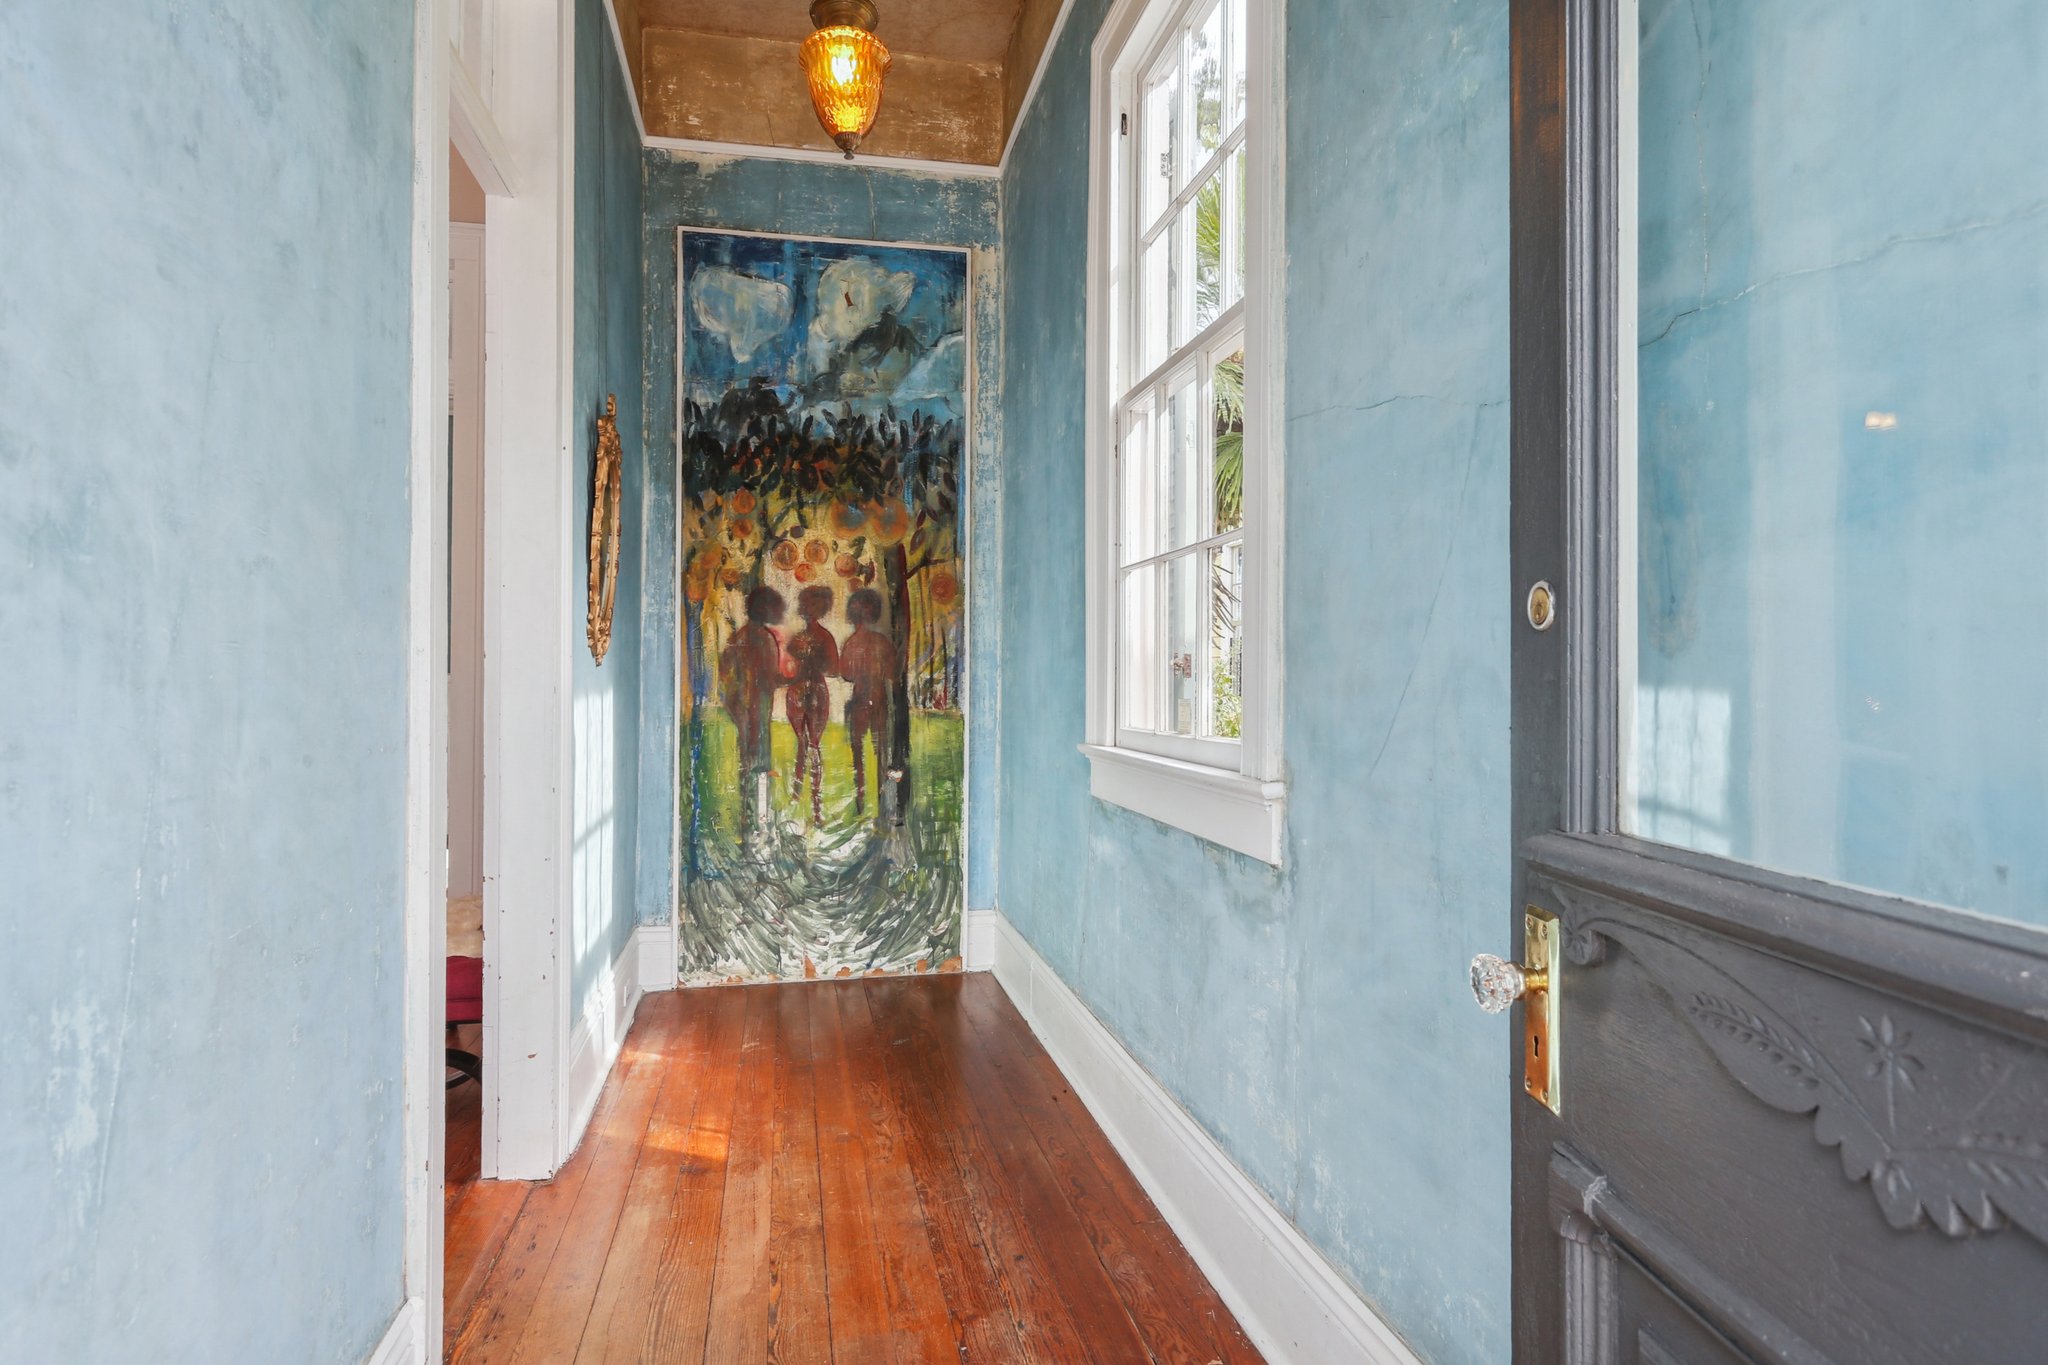 Entry foyer features wall mural by New Orleans-based artist Haroumi